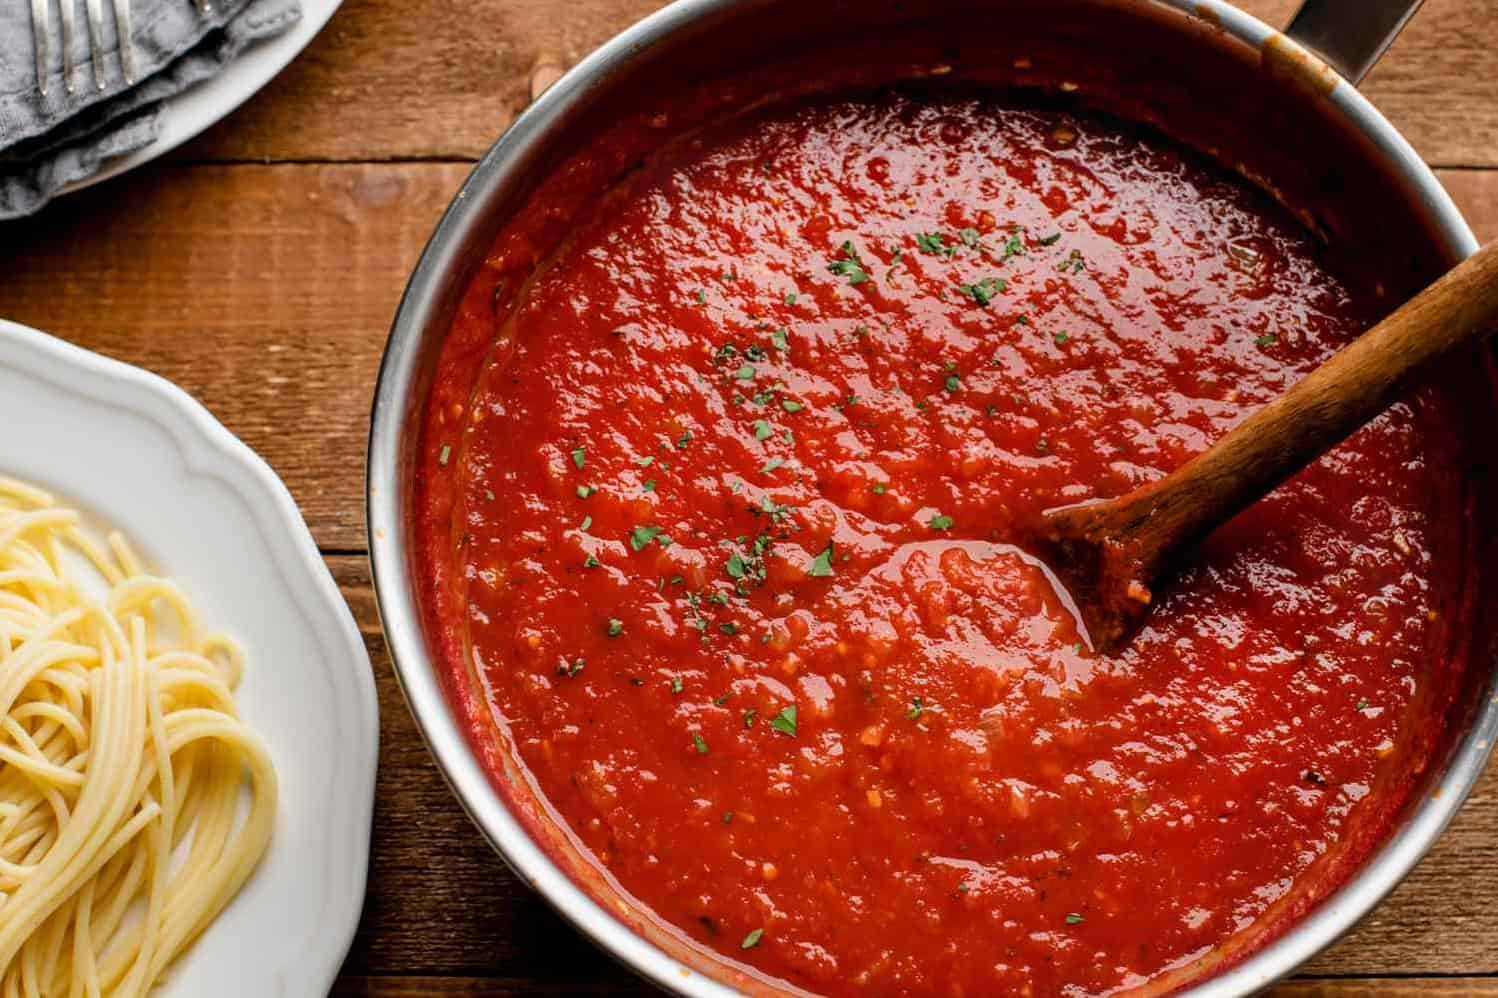 Homemade Tomato Sauce Recipe That’s Simply Delicious